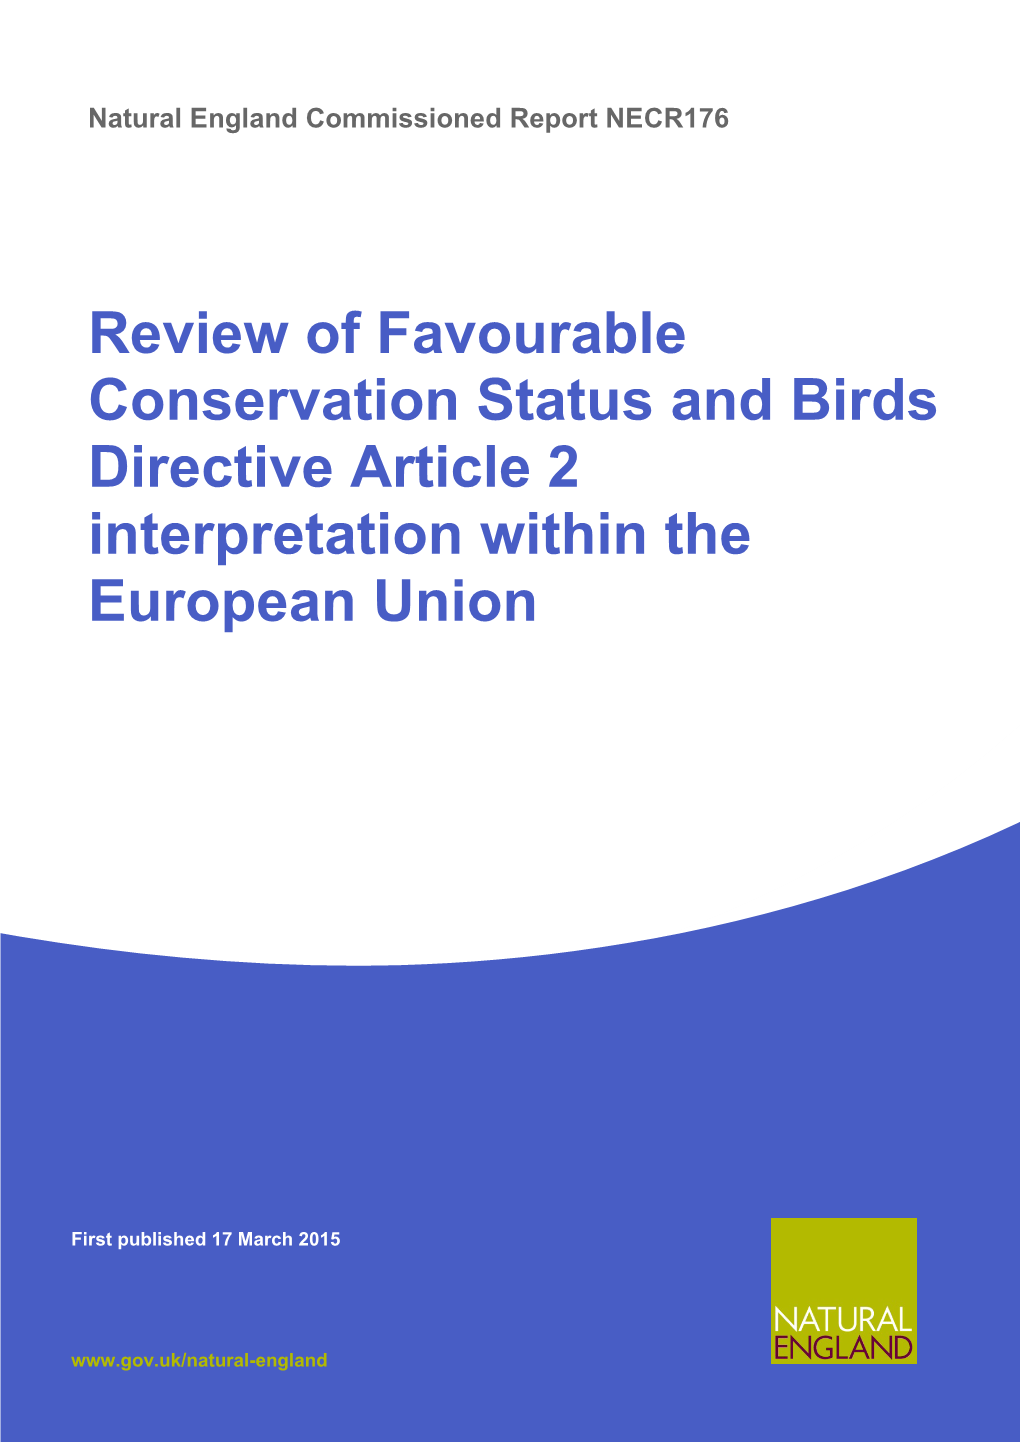 Review of Favourable Conservation Status and Birds Directive Article 2 Interpretation Within the European Union